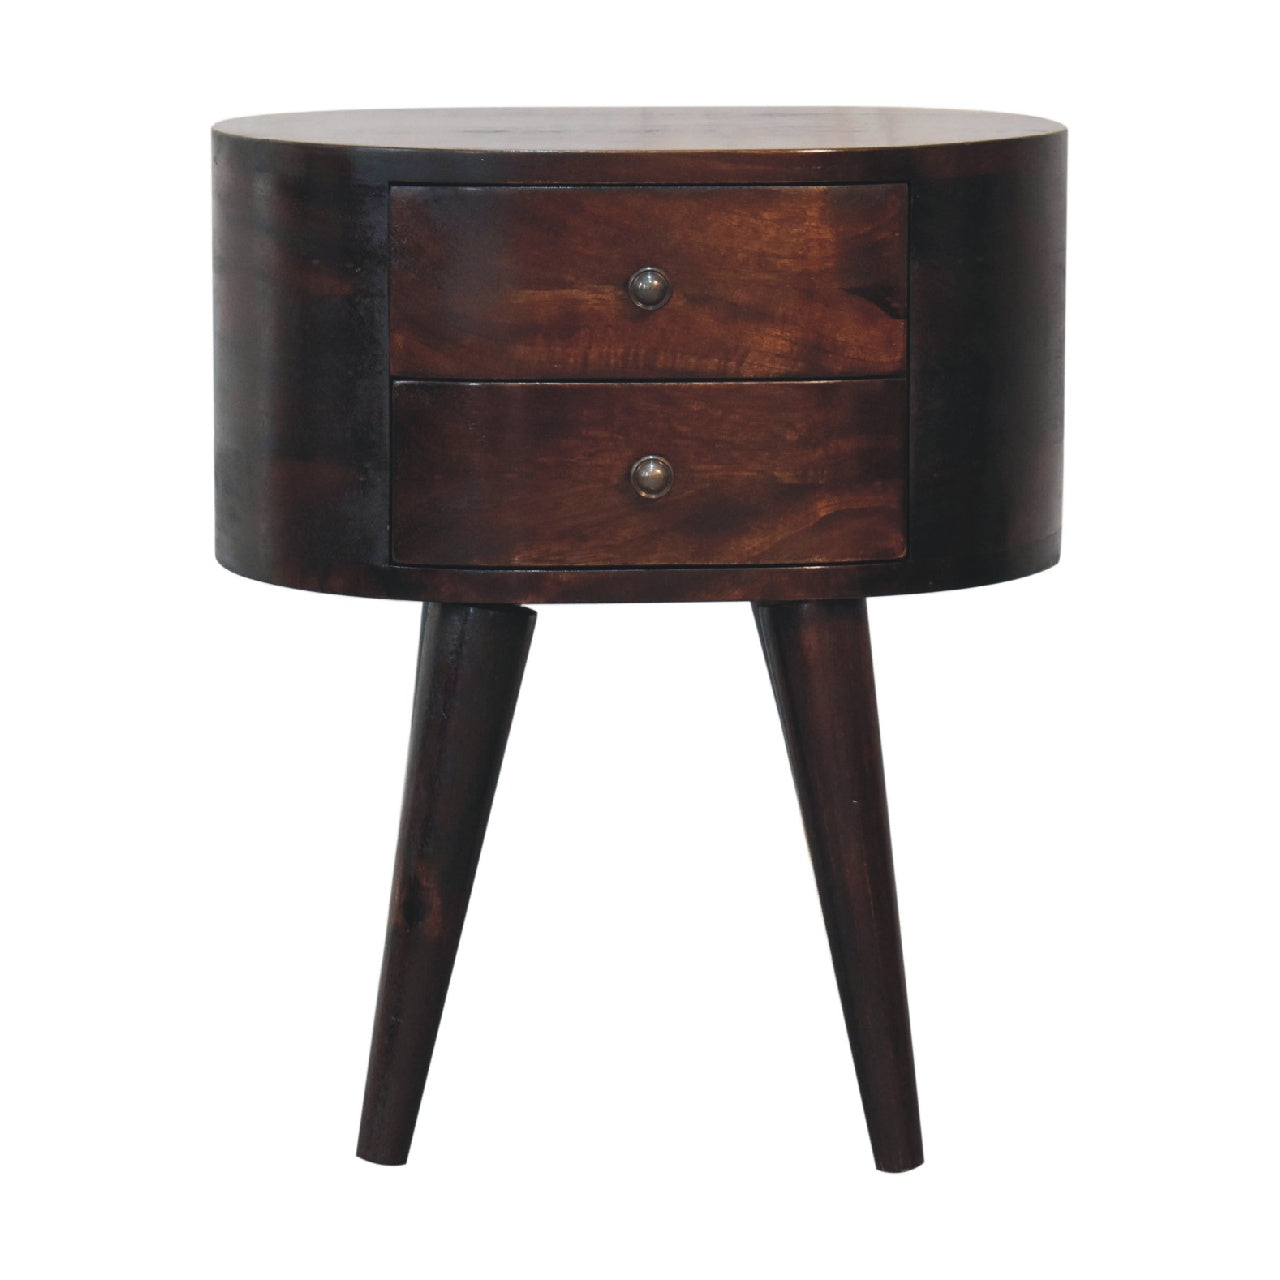 View Light Walnut Rounded Bedside Table information